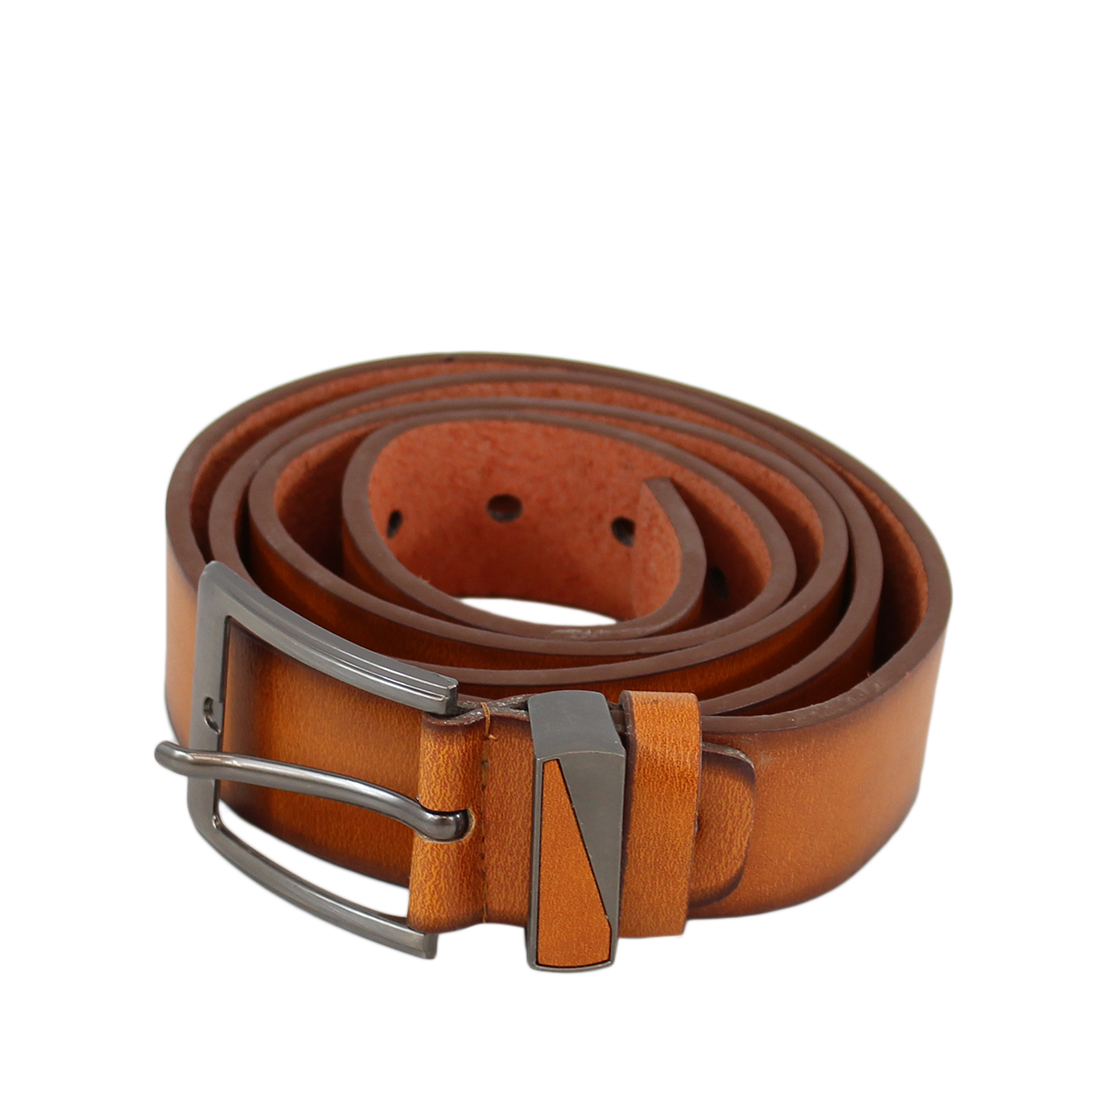 * Plain wide leather belt with silver buckle